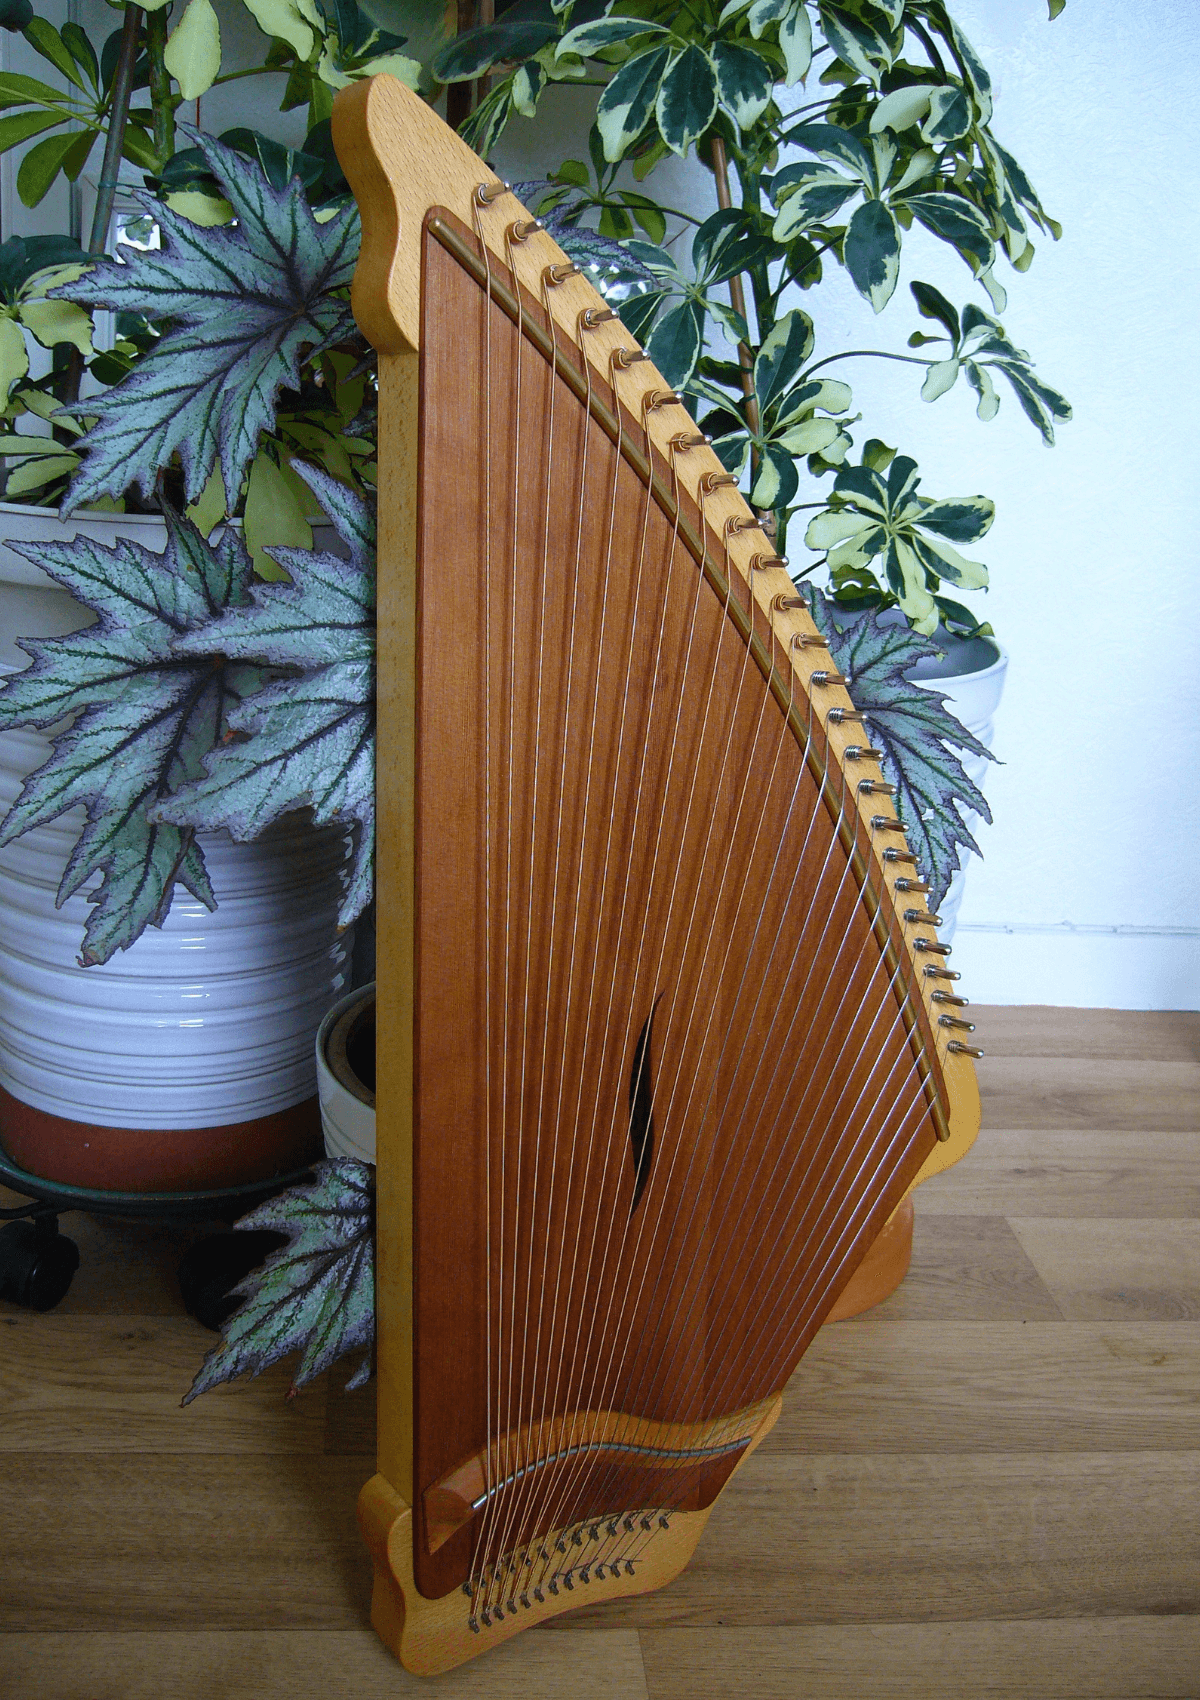 Kantele music instruments from Finland